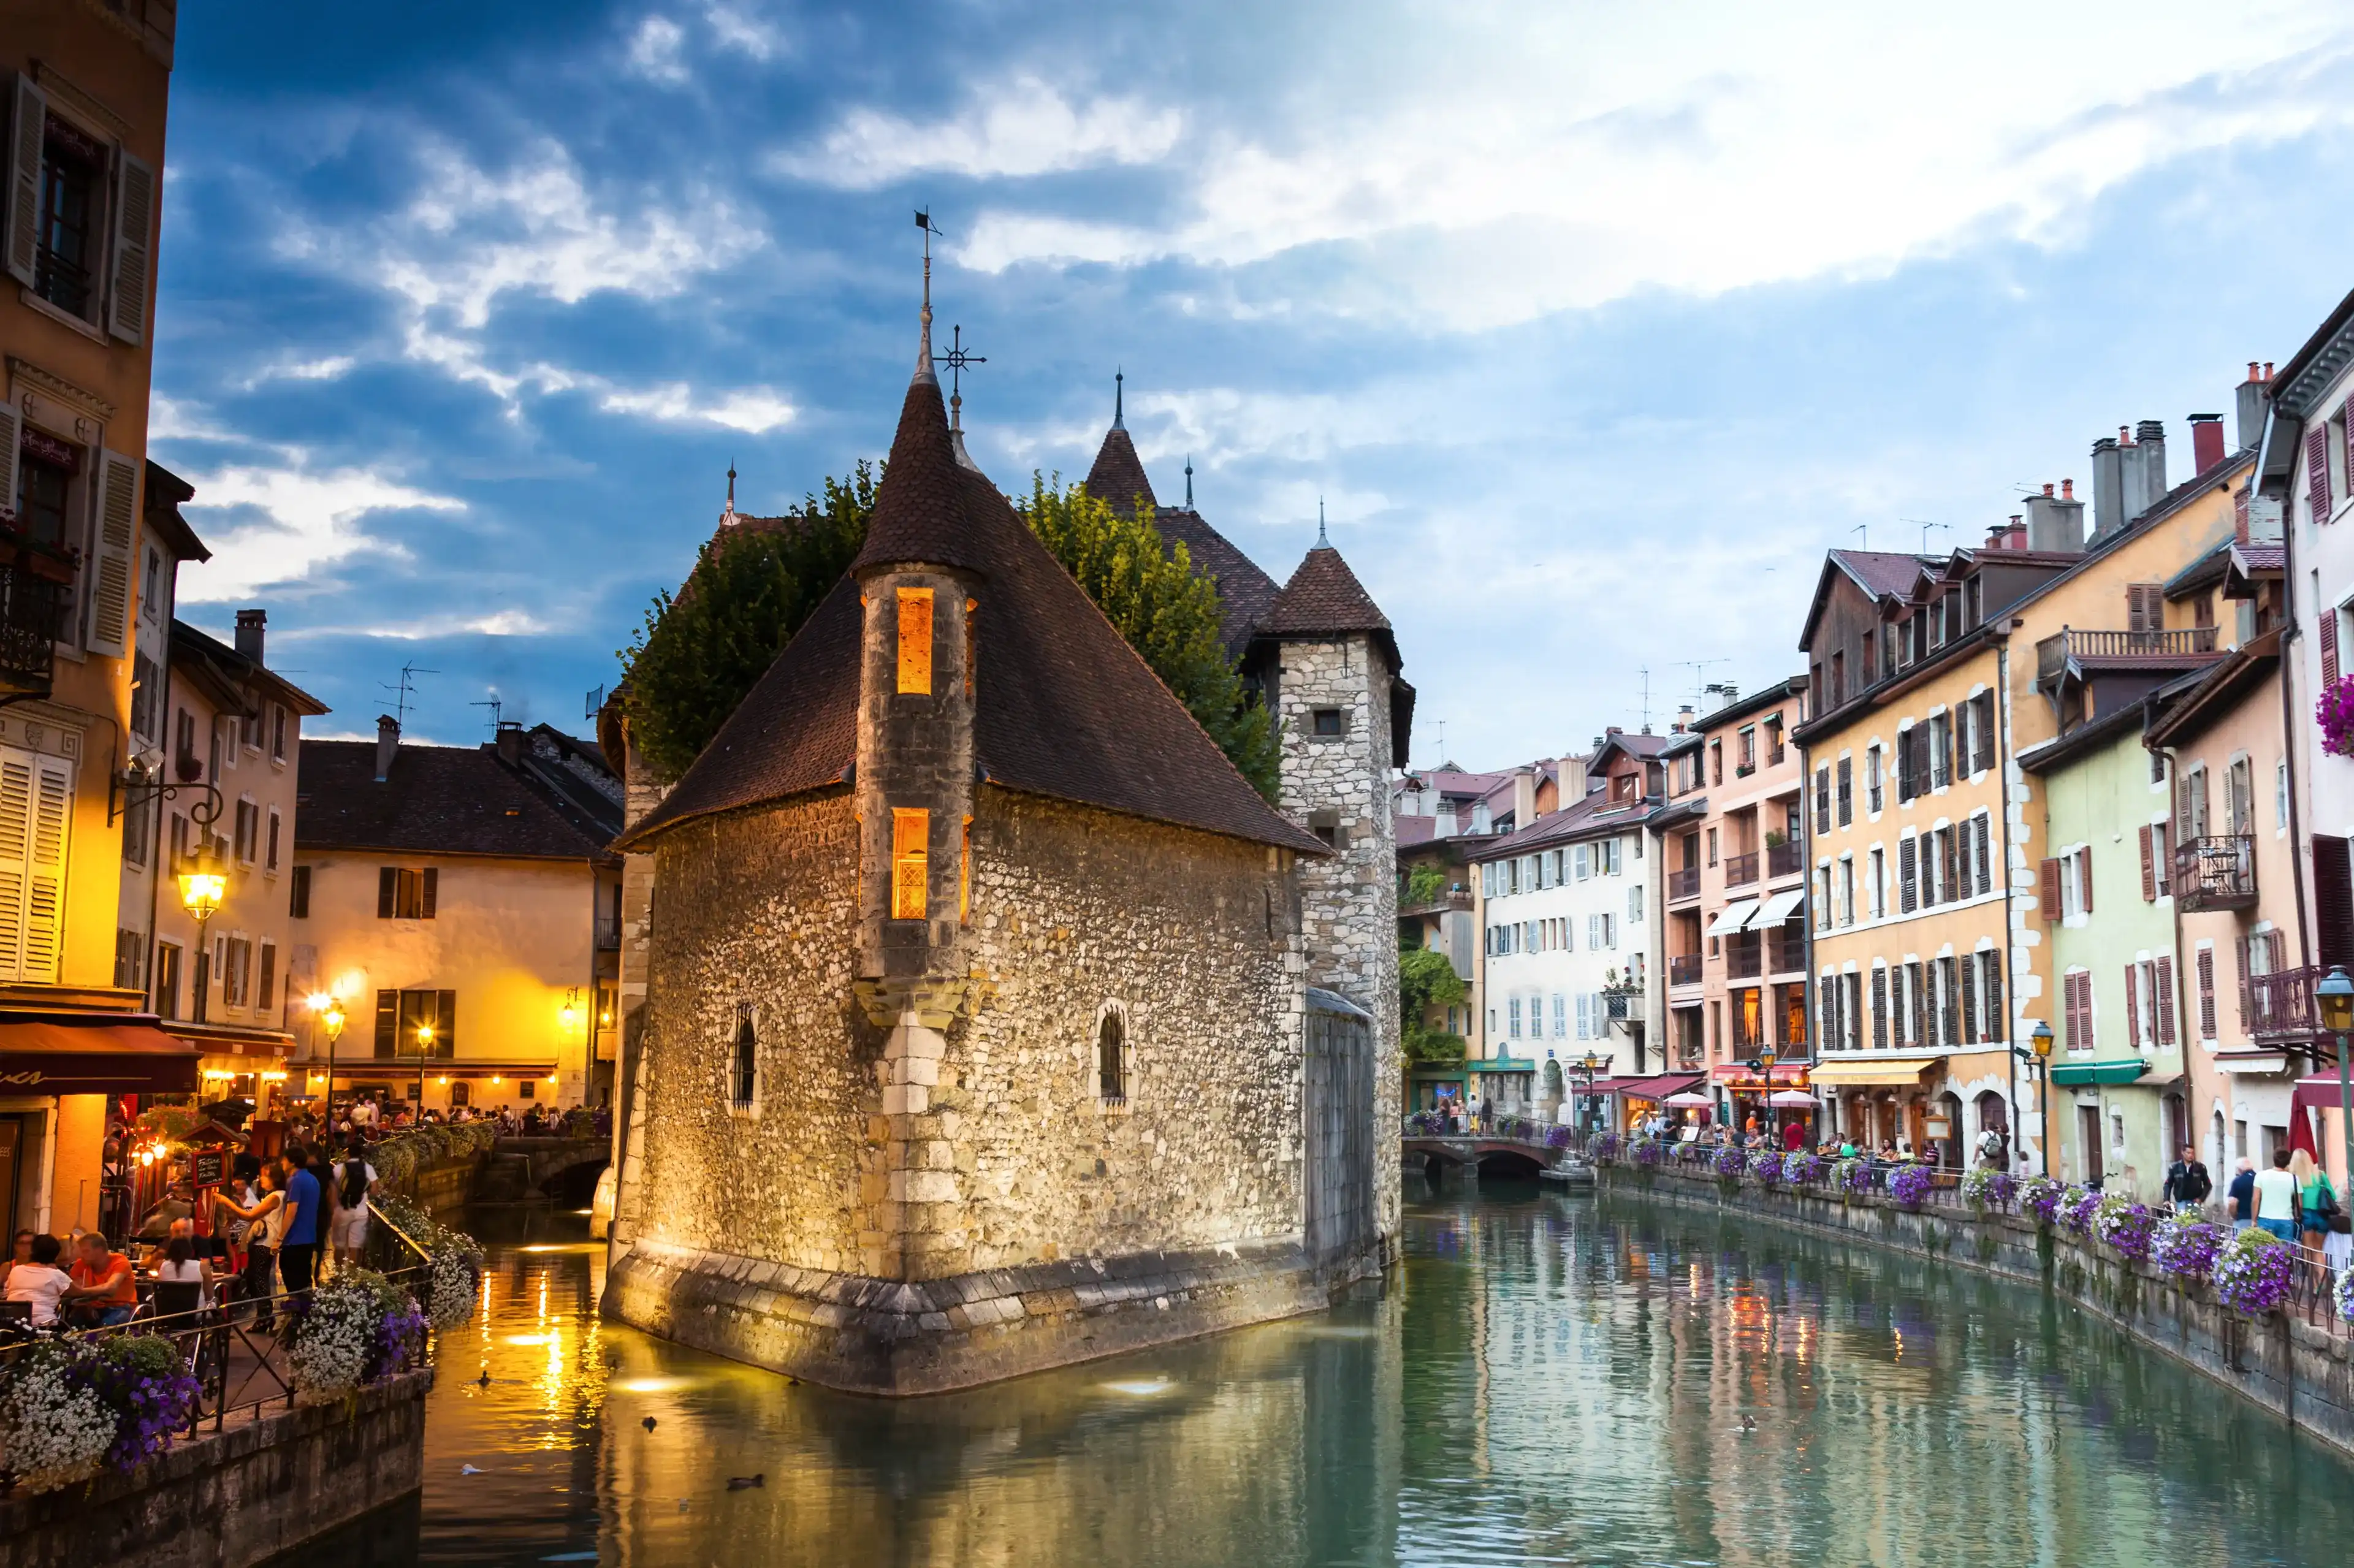 Best Annecy hotels. Cheap hotels in Annecy, France